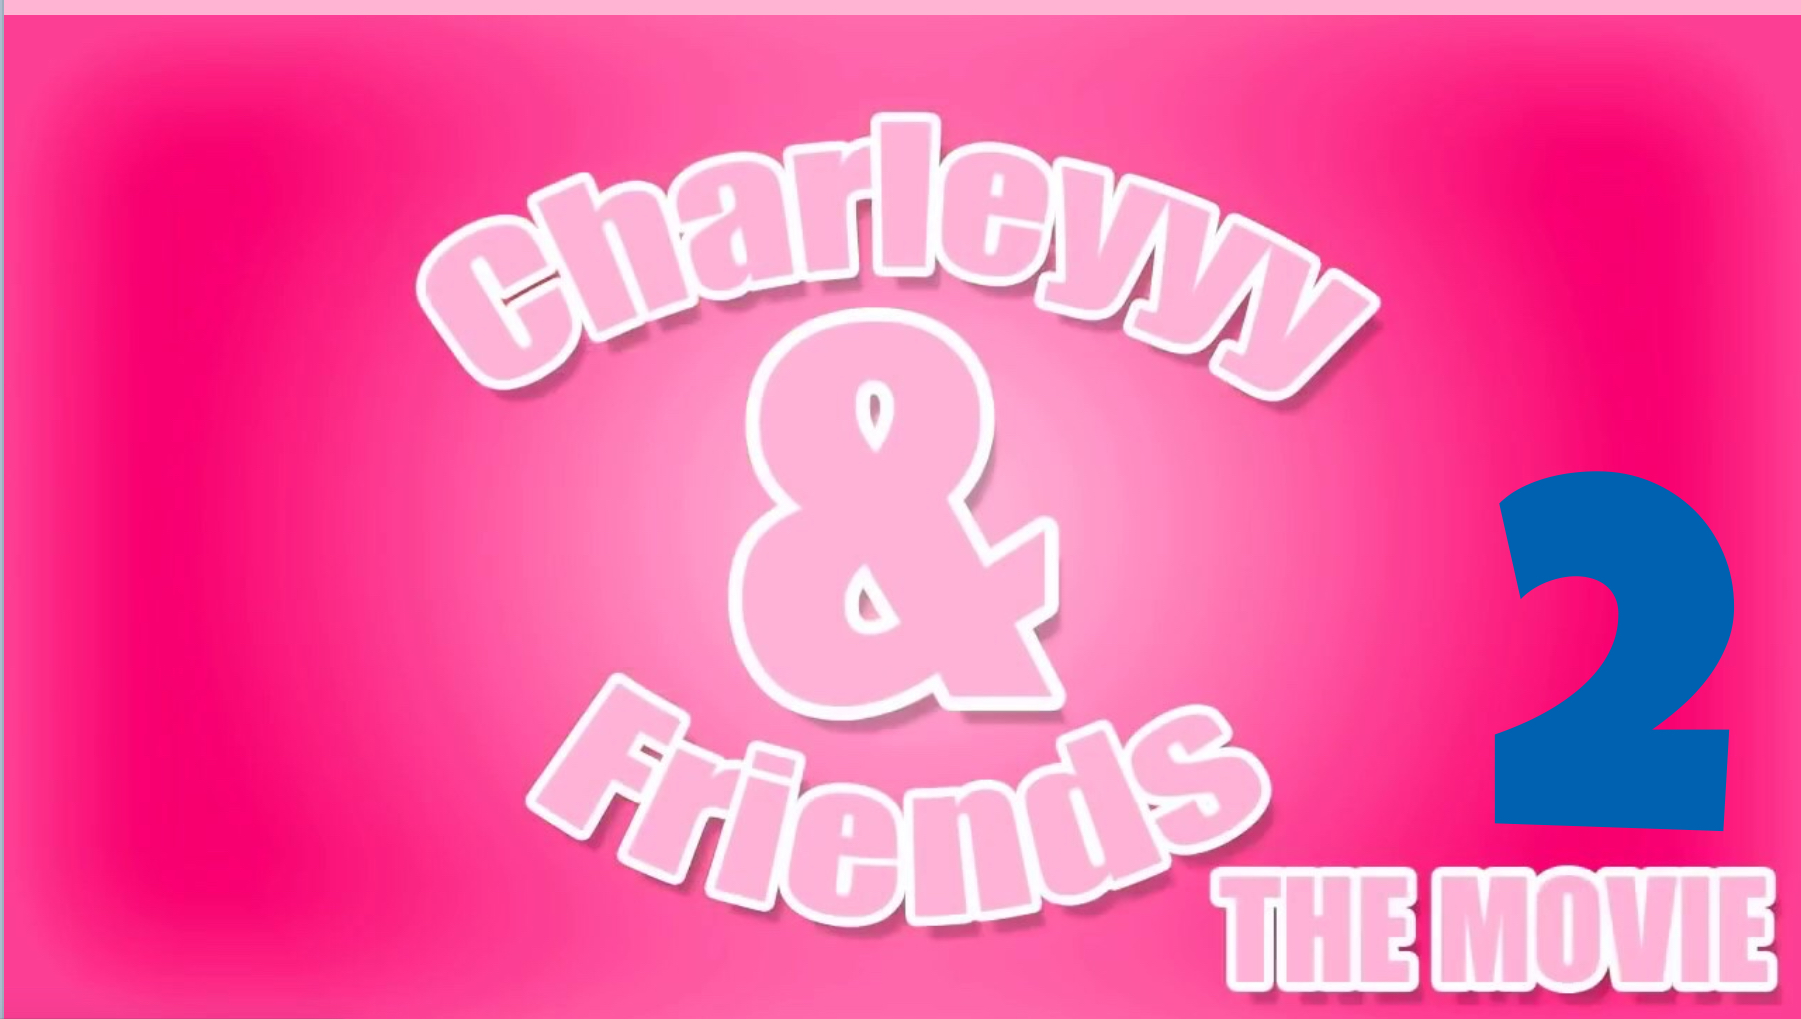 charleyyy and friends the video game xbox 360